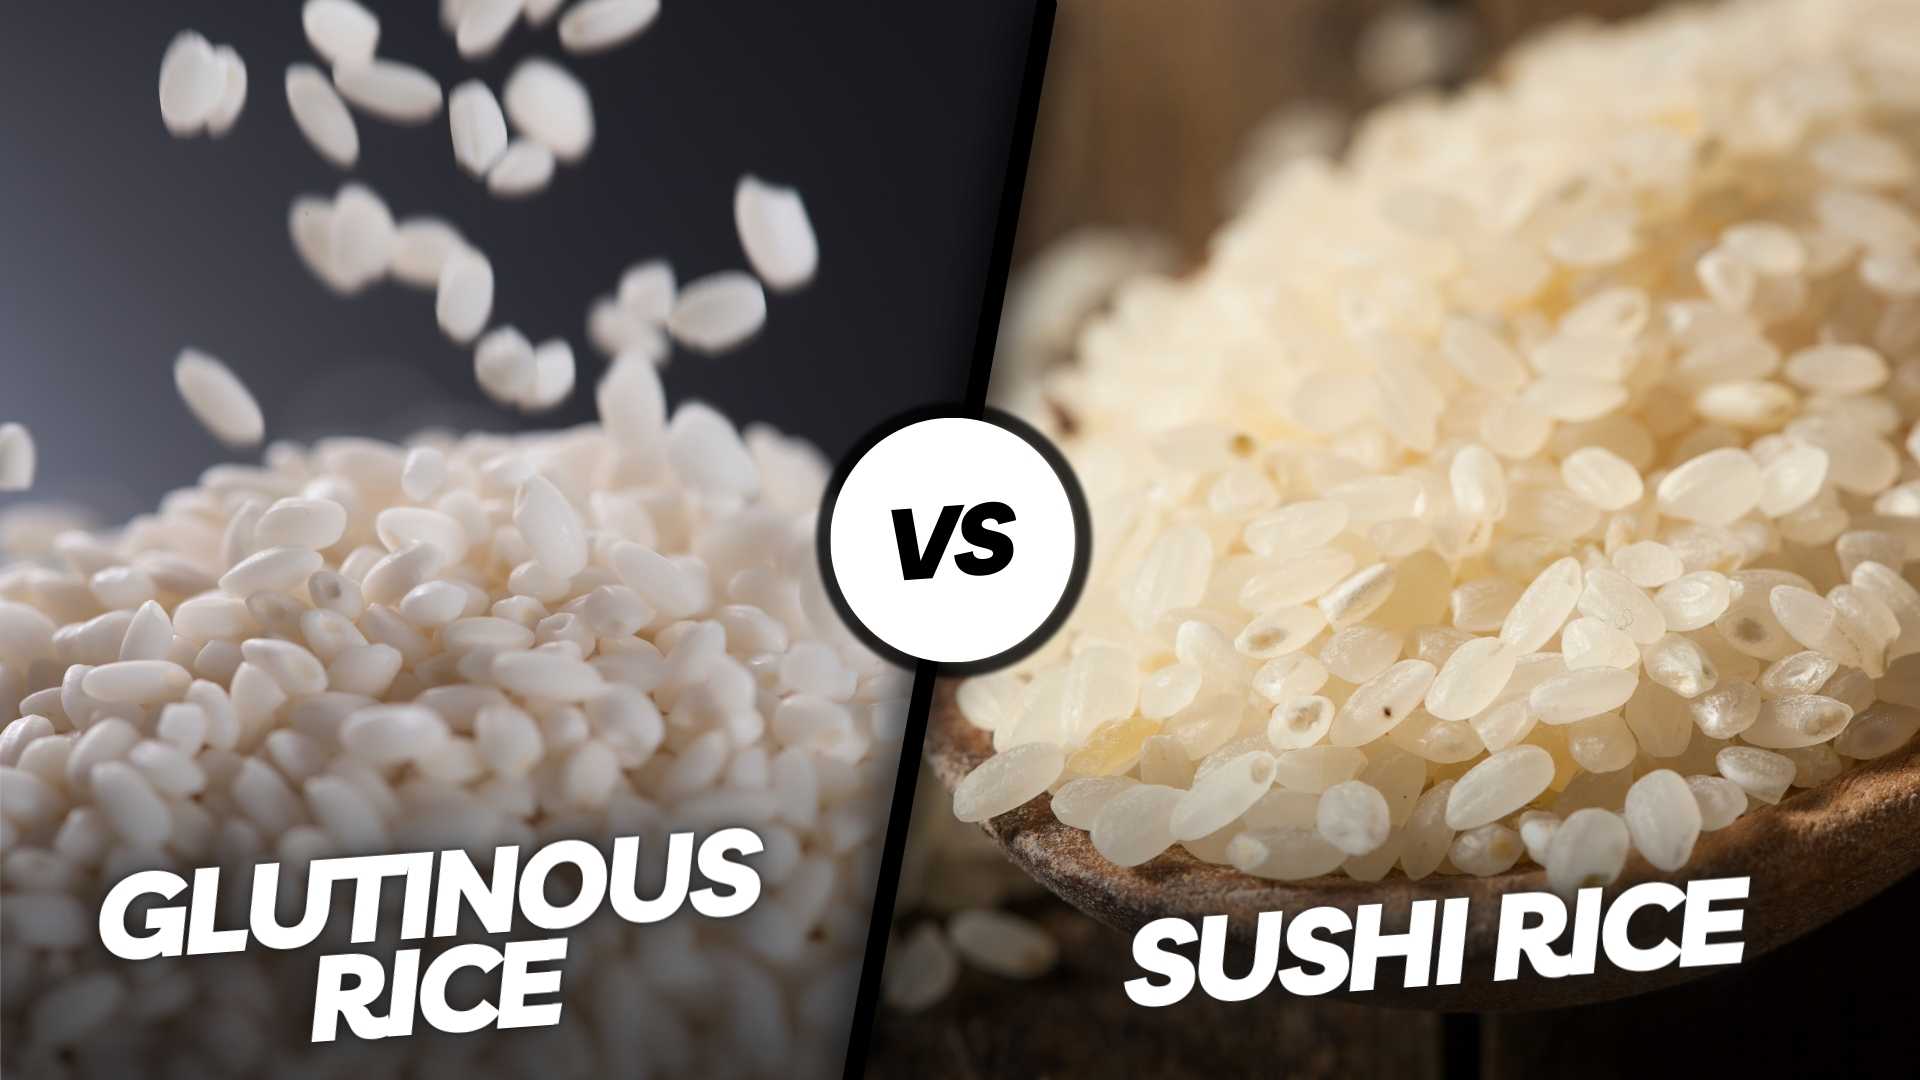 Glutinous Rice vs Sushi Rice: What’s the Difference?